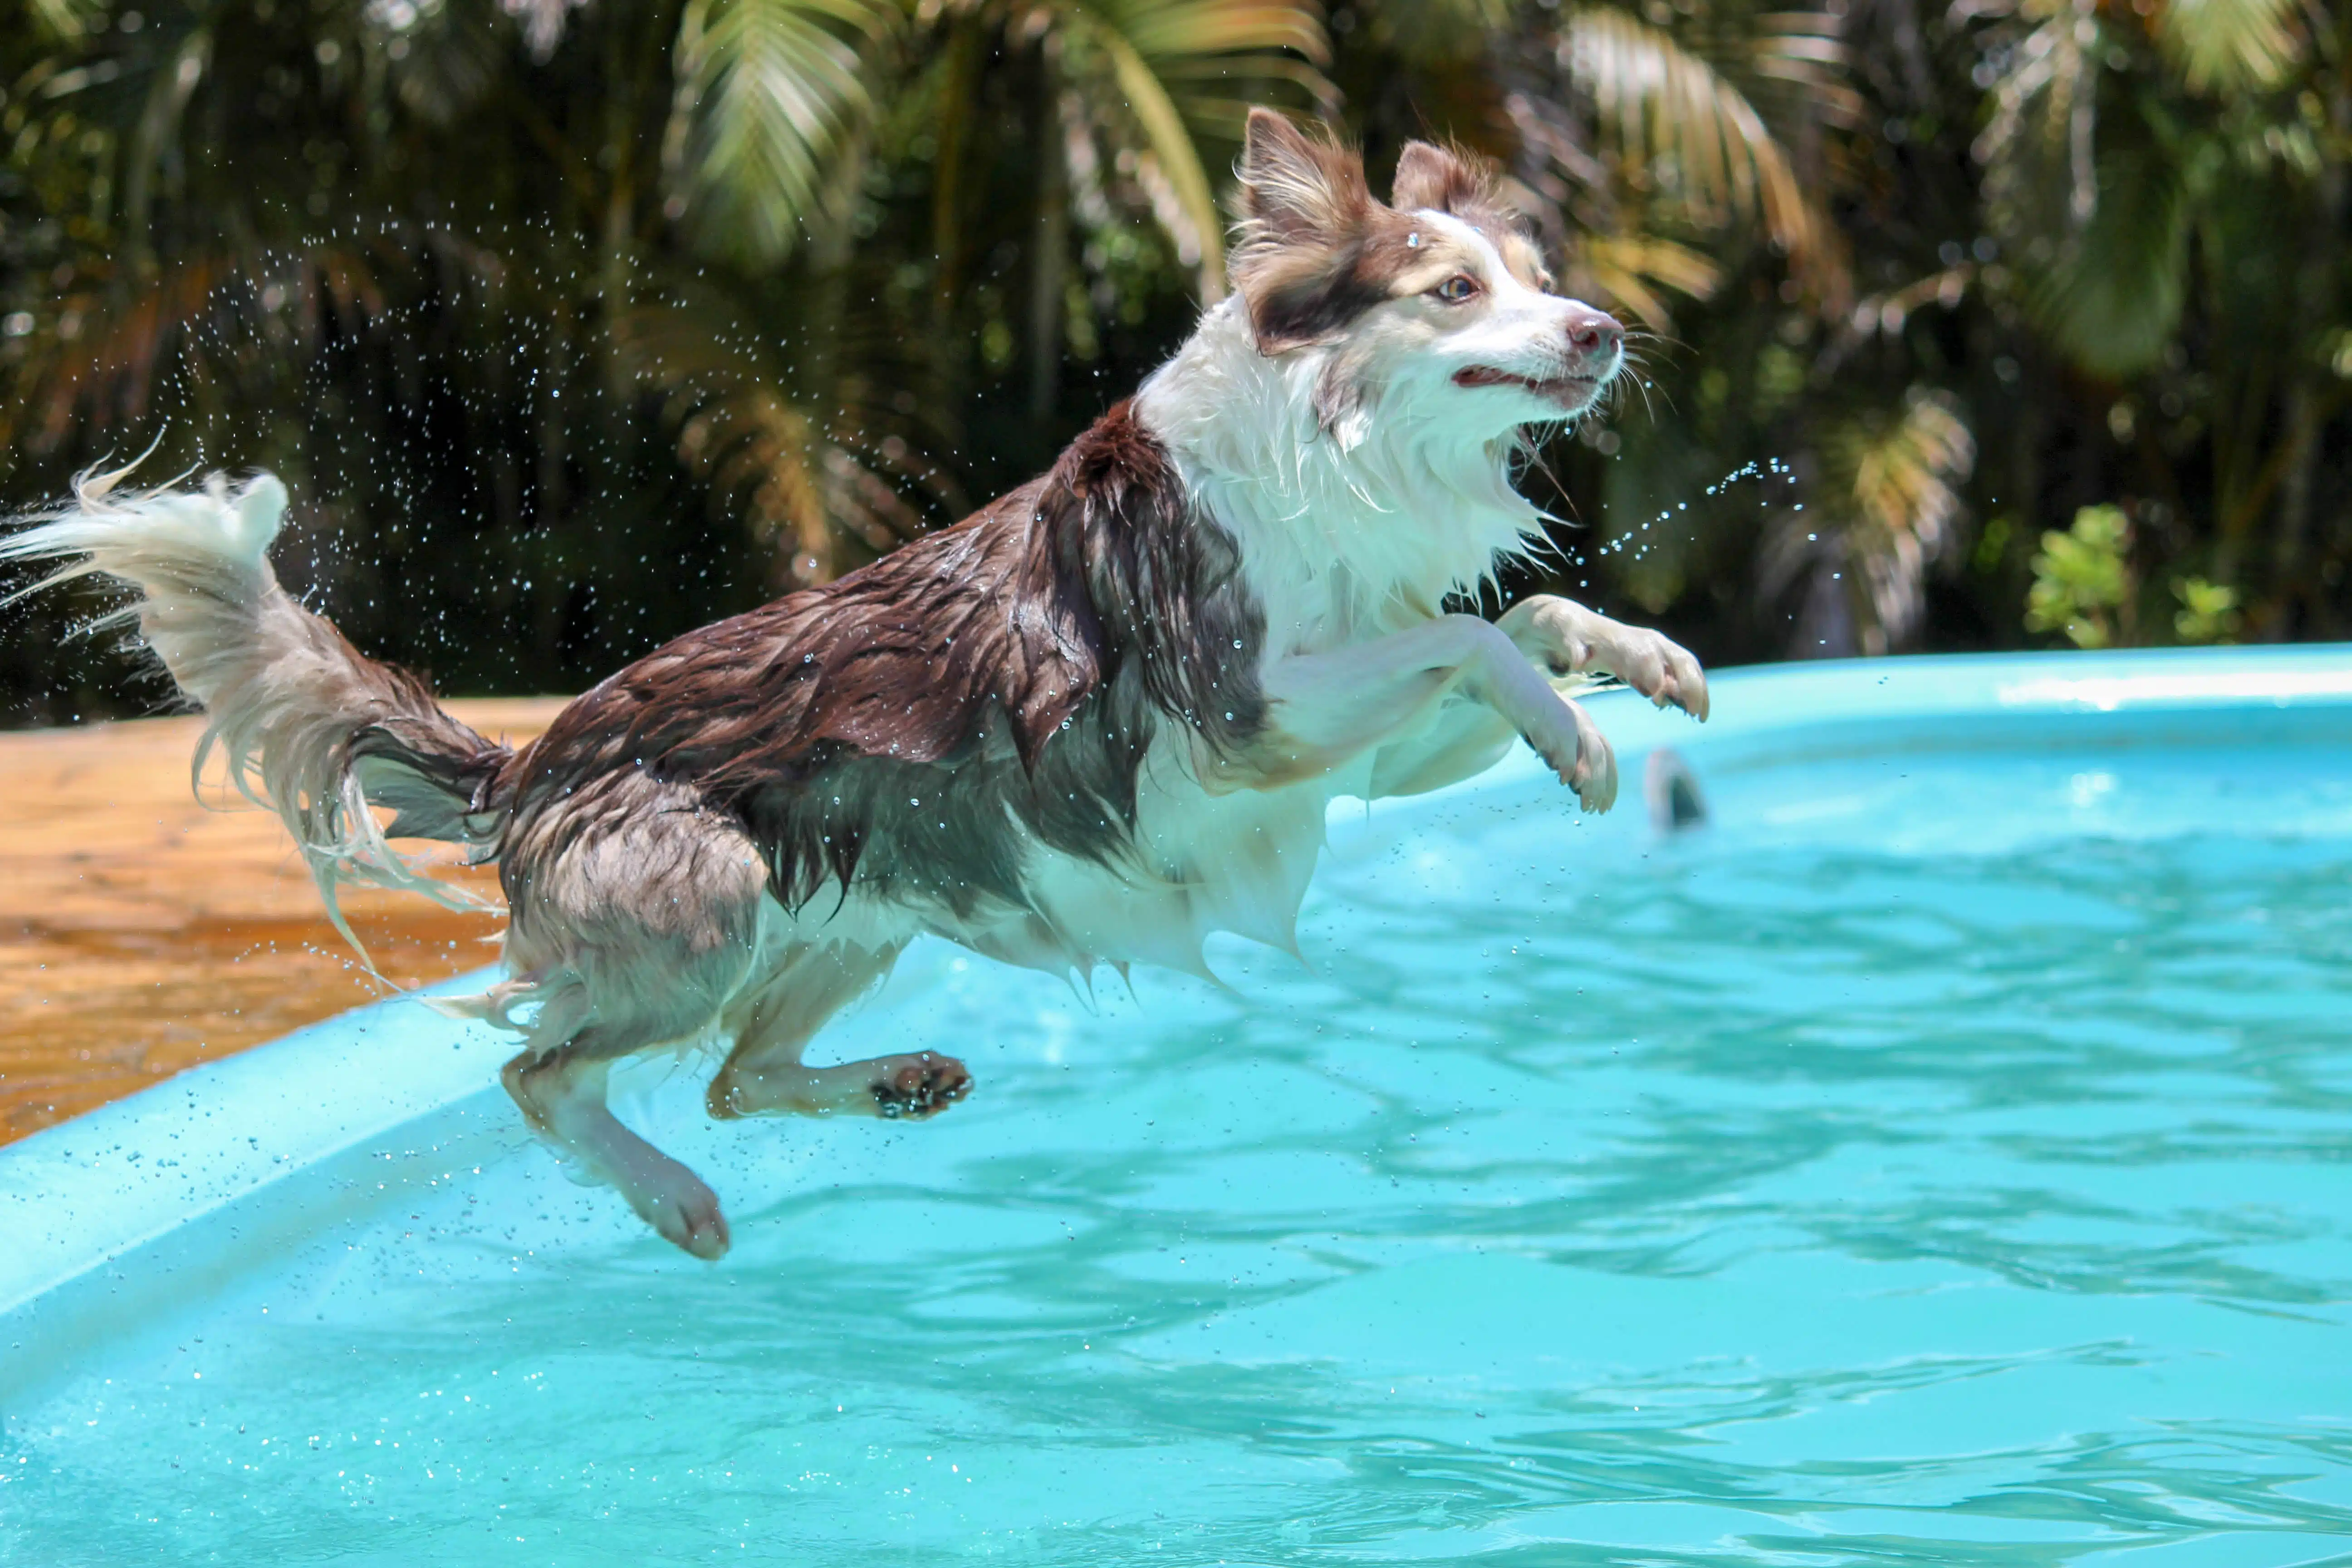 A happy dog learning to swim in a pool.